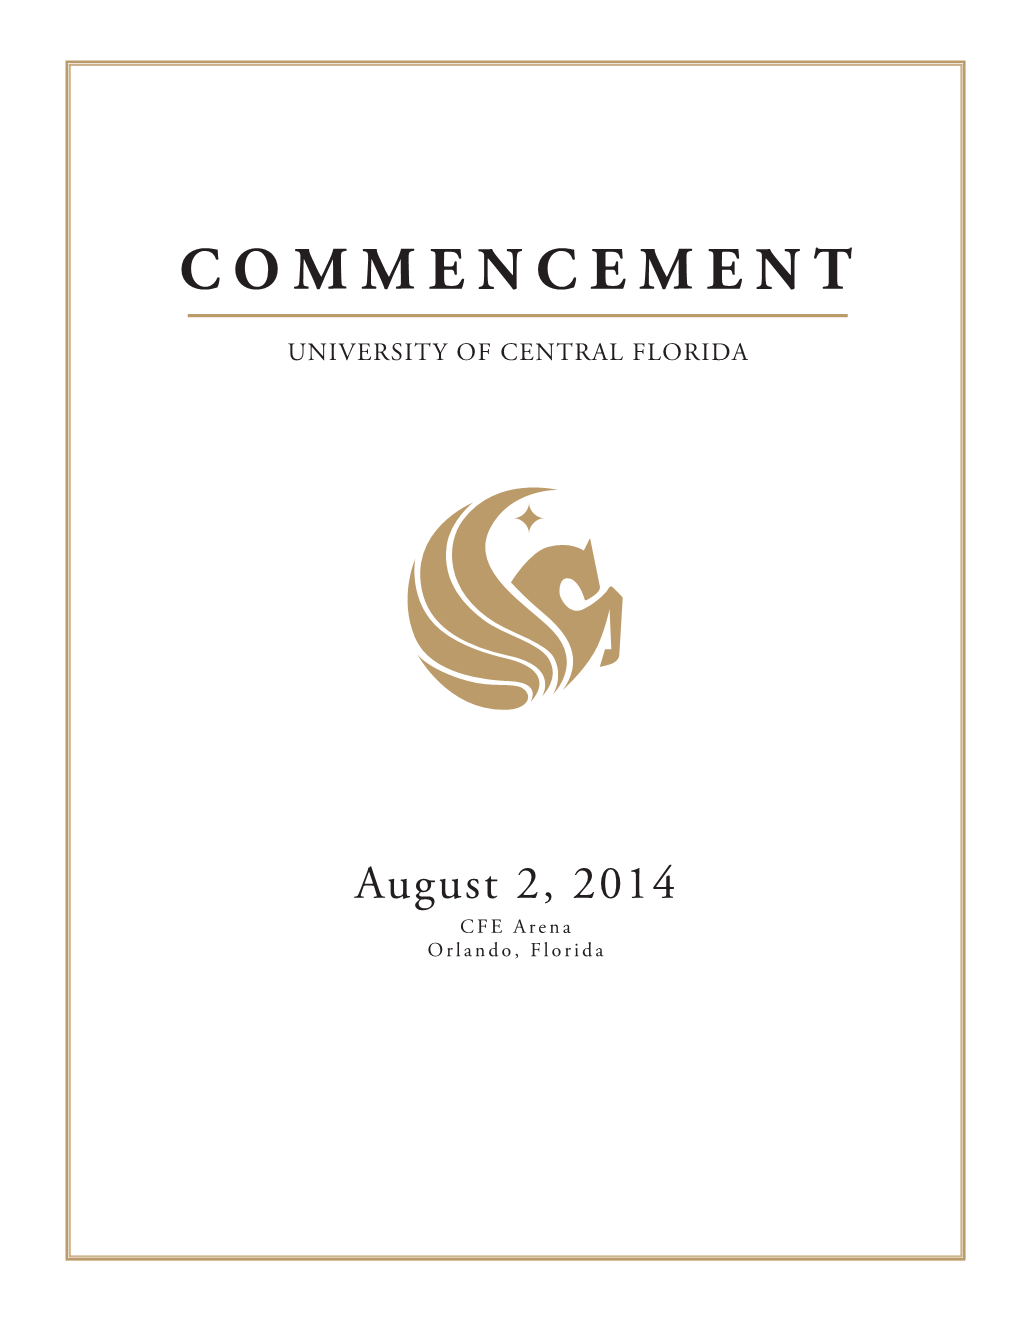 Commencement Program Will Be Available at for Download As a PDF Beginning Monday, August 4, 2014